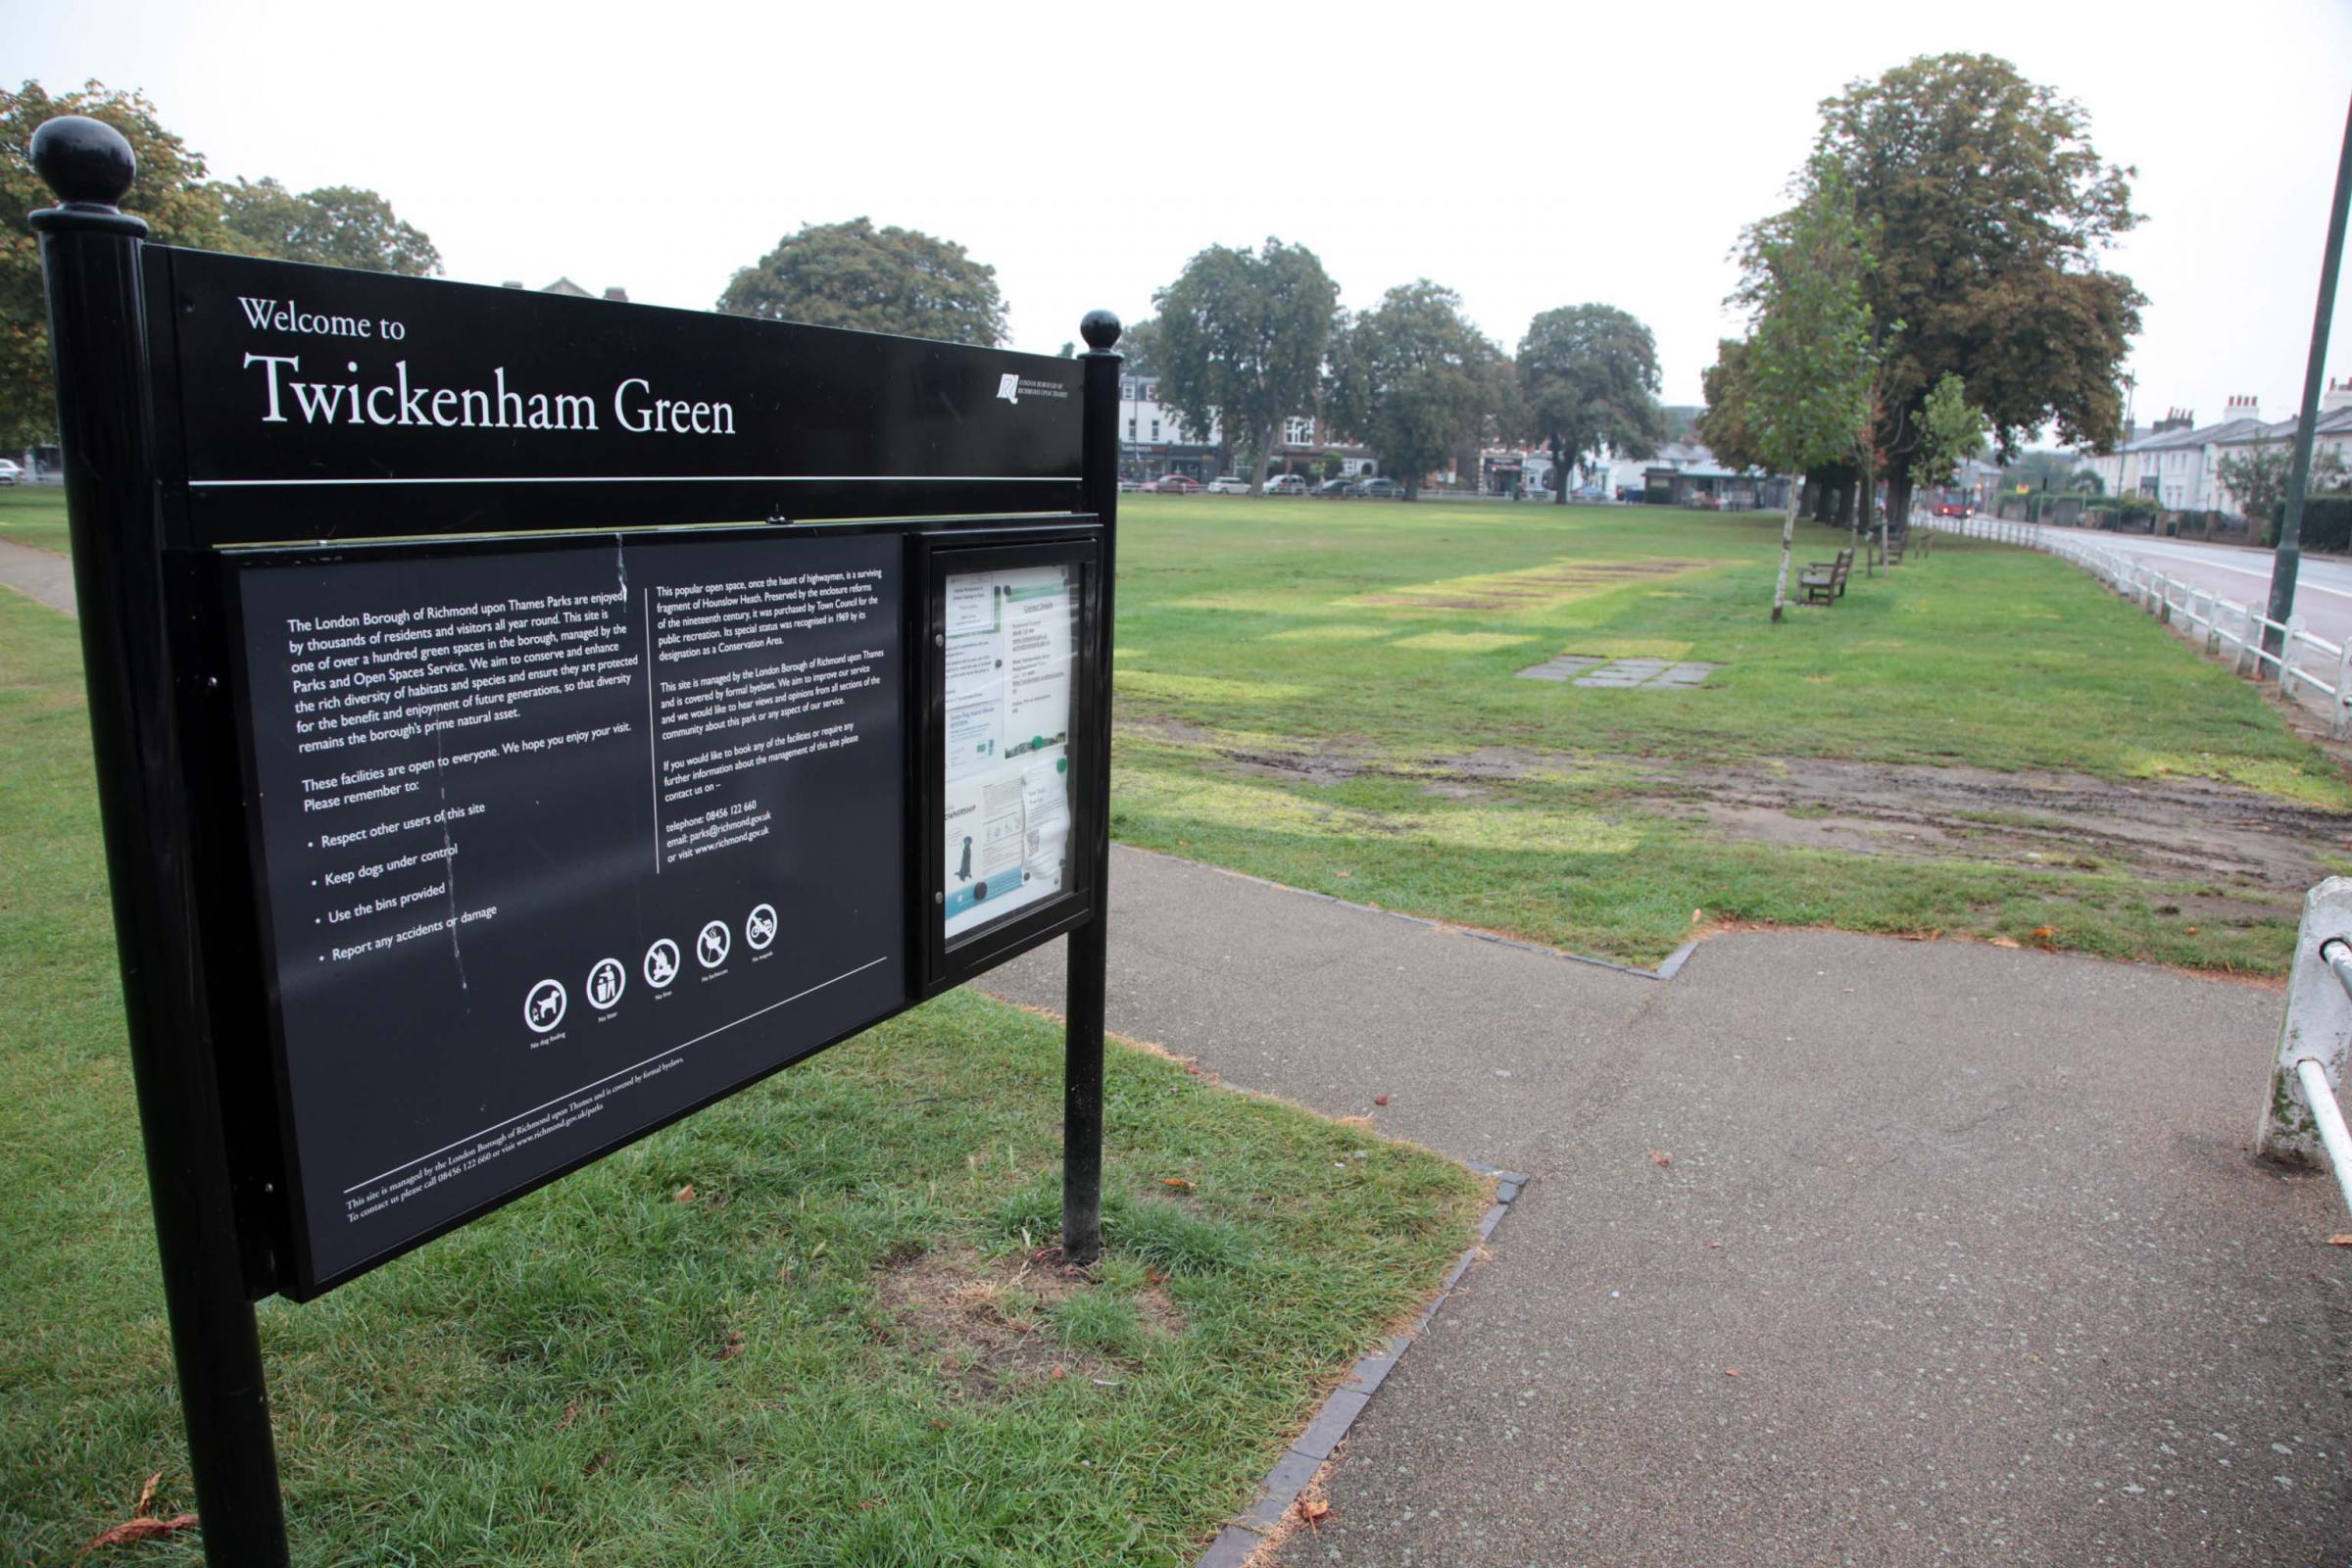 Twickenham Green is one of three areas portaloos could be placed